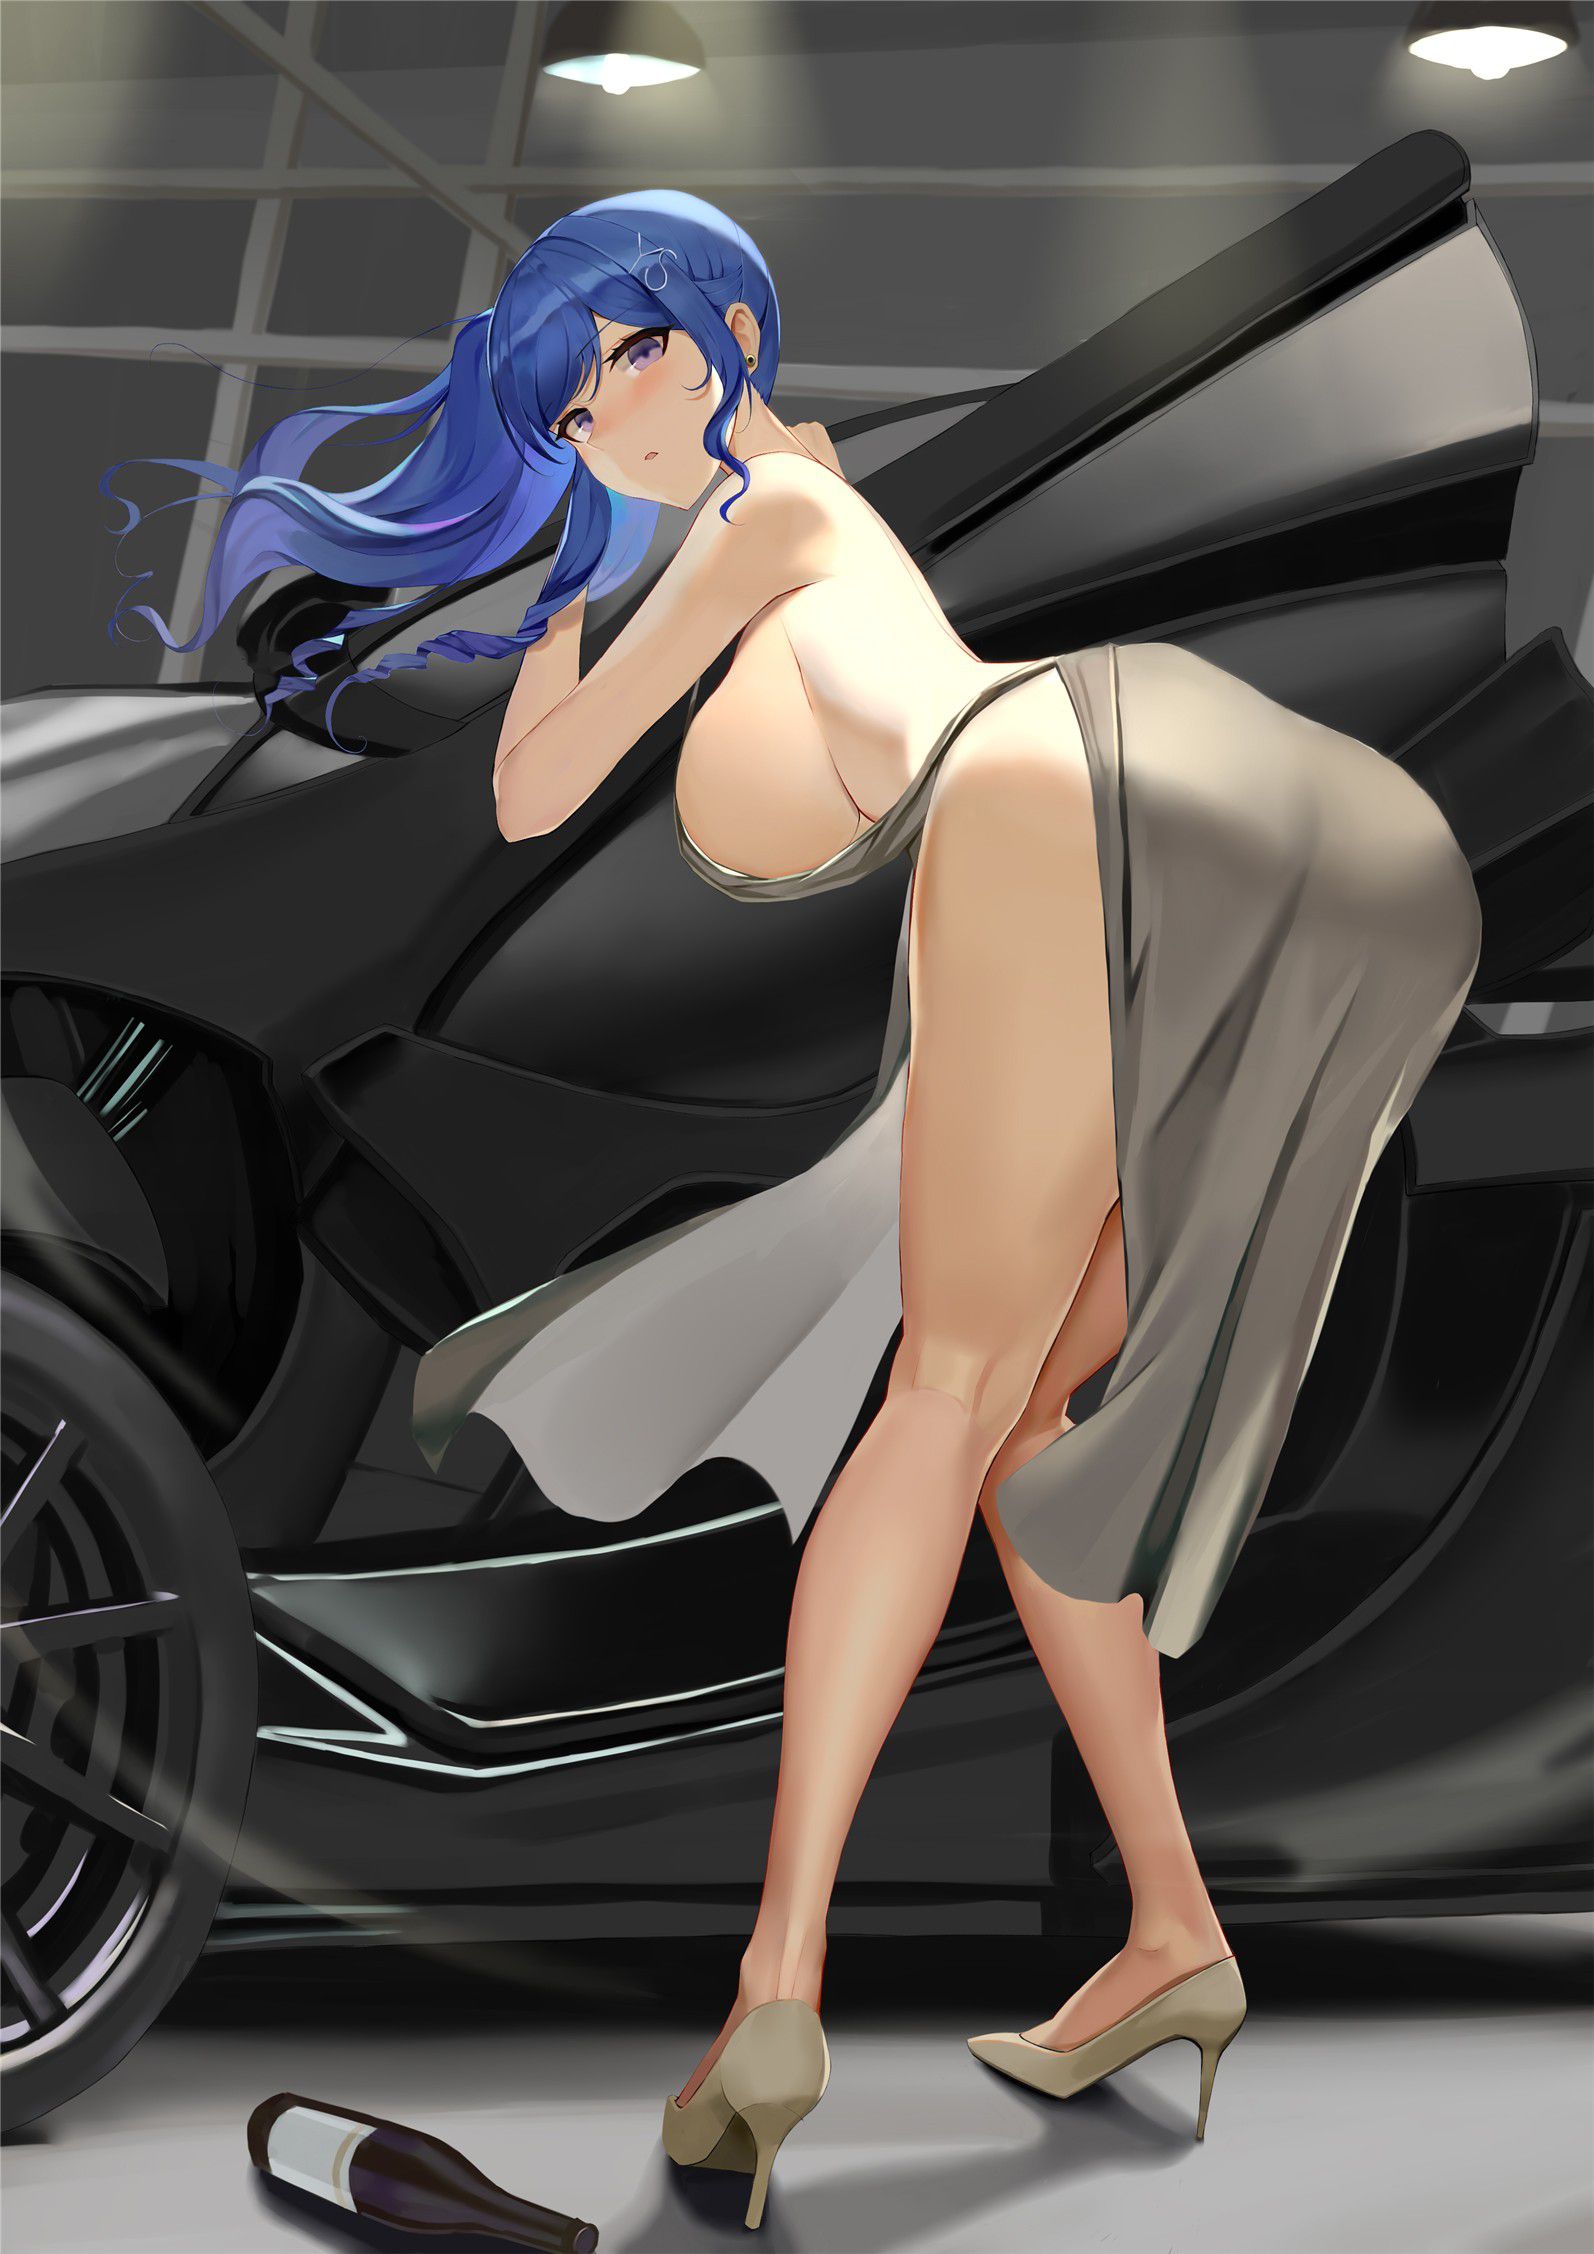 Two-dimensional erotic image of St. Louis of Azur Lane who wants to call it St. Louis unintentionally 30